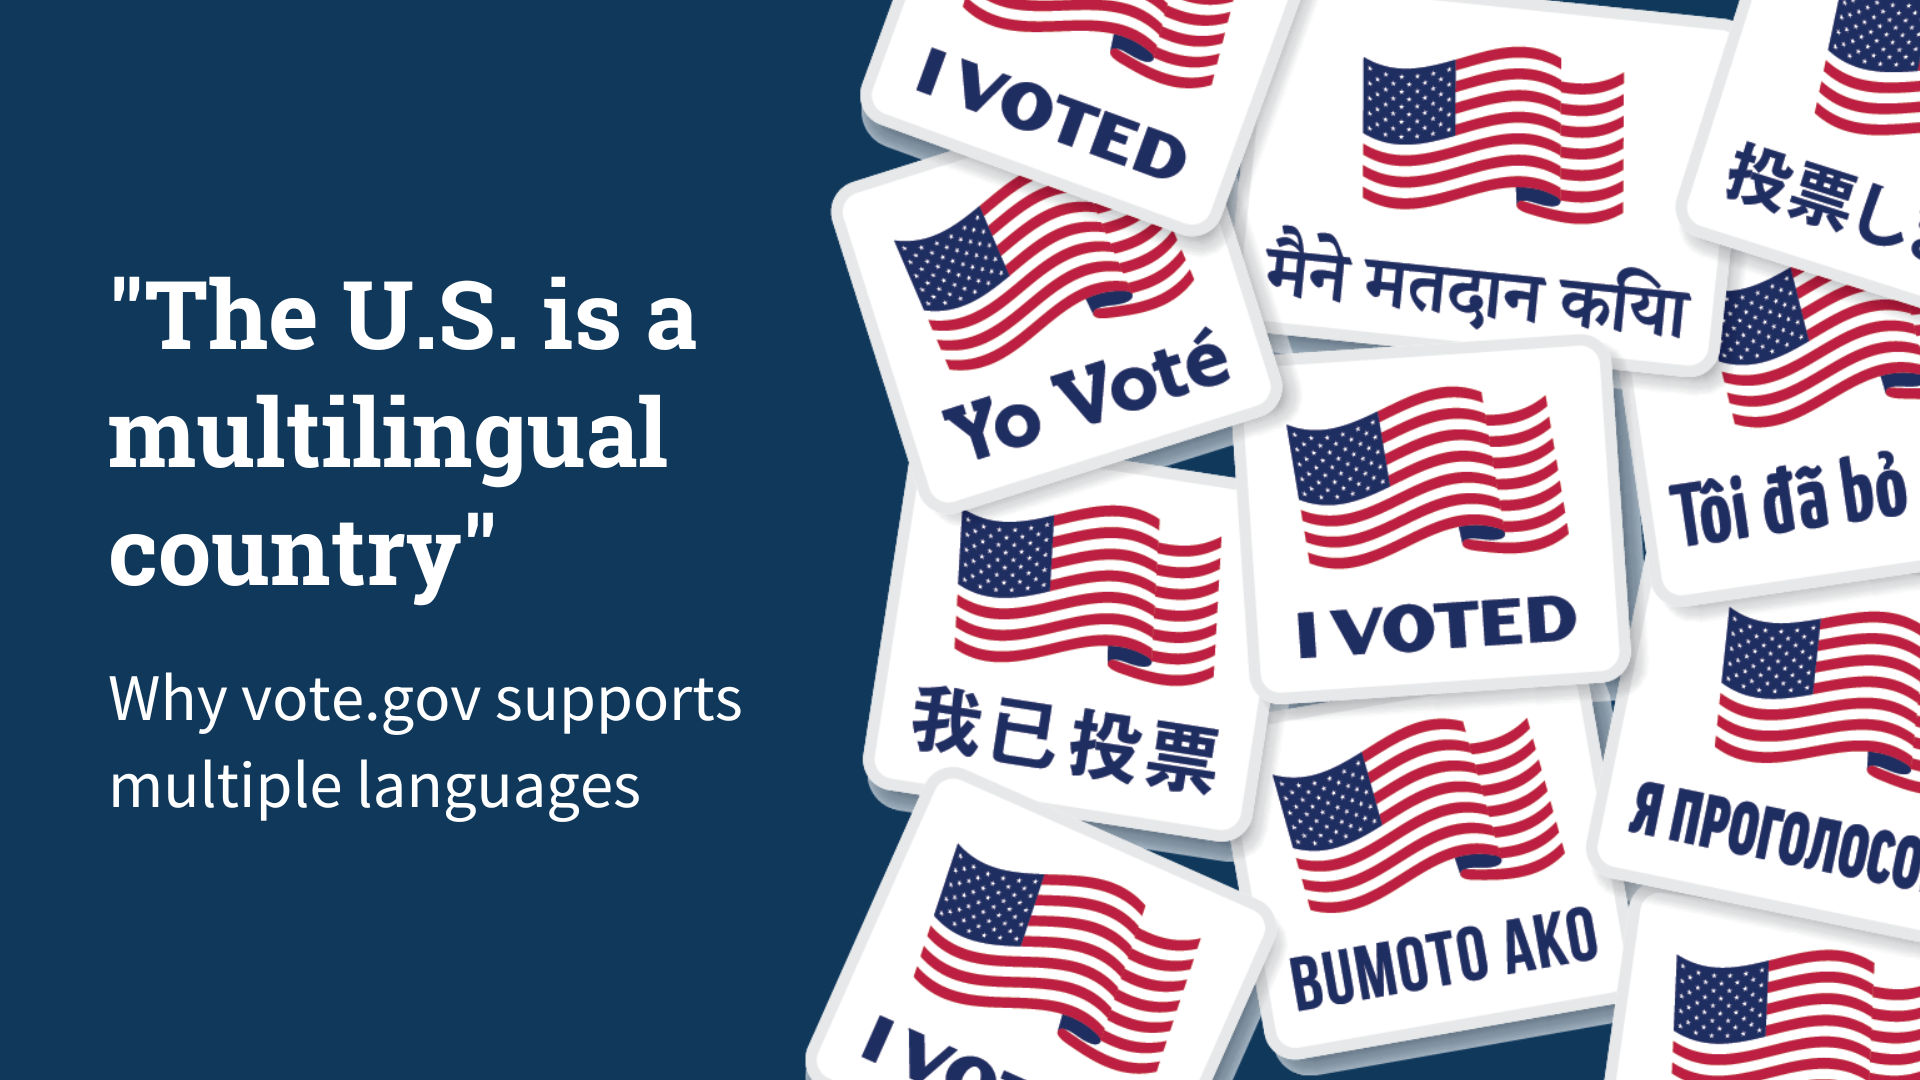 Why vote.gov supports multiple languages